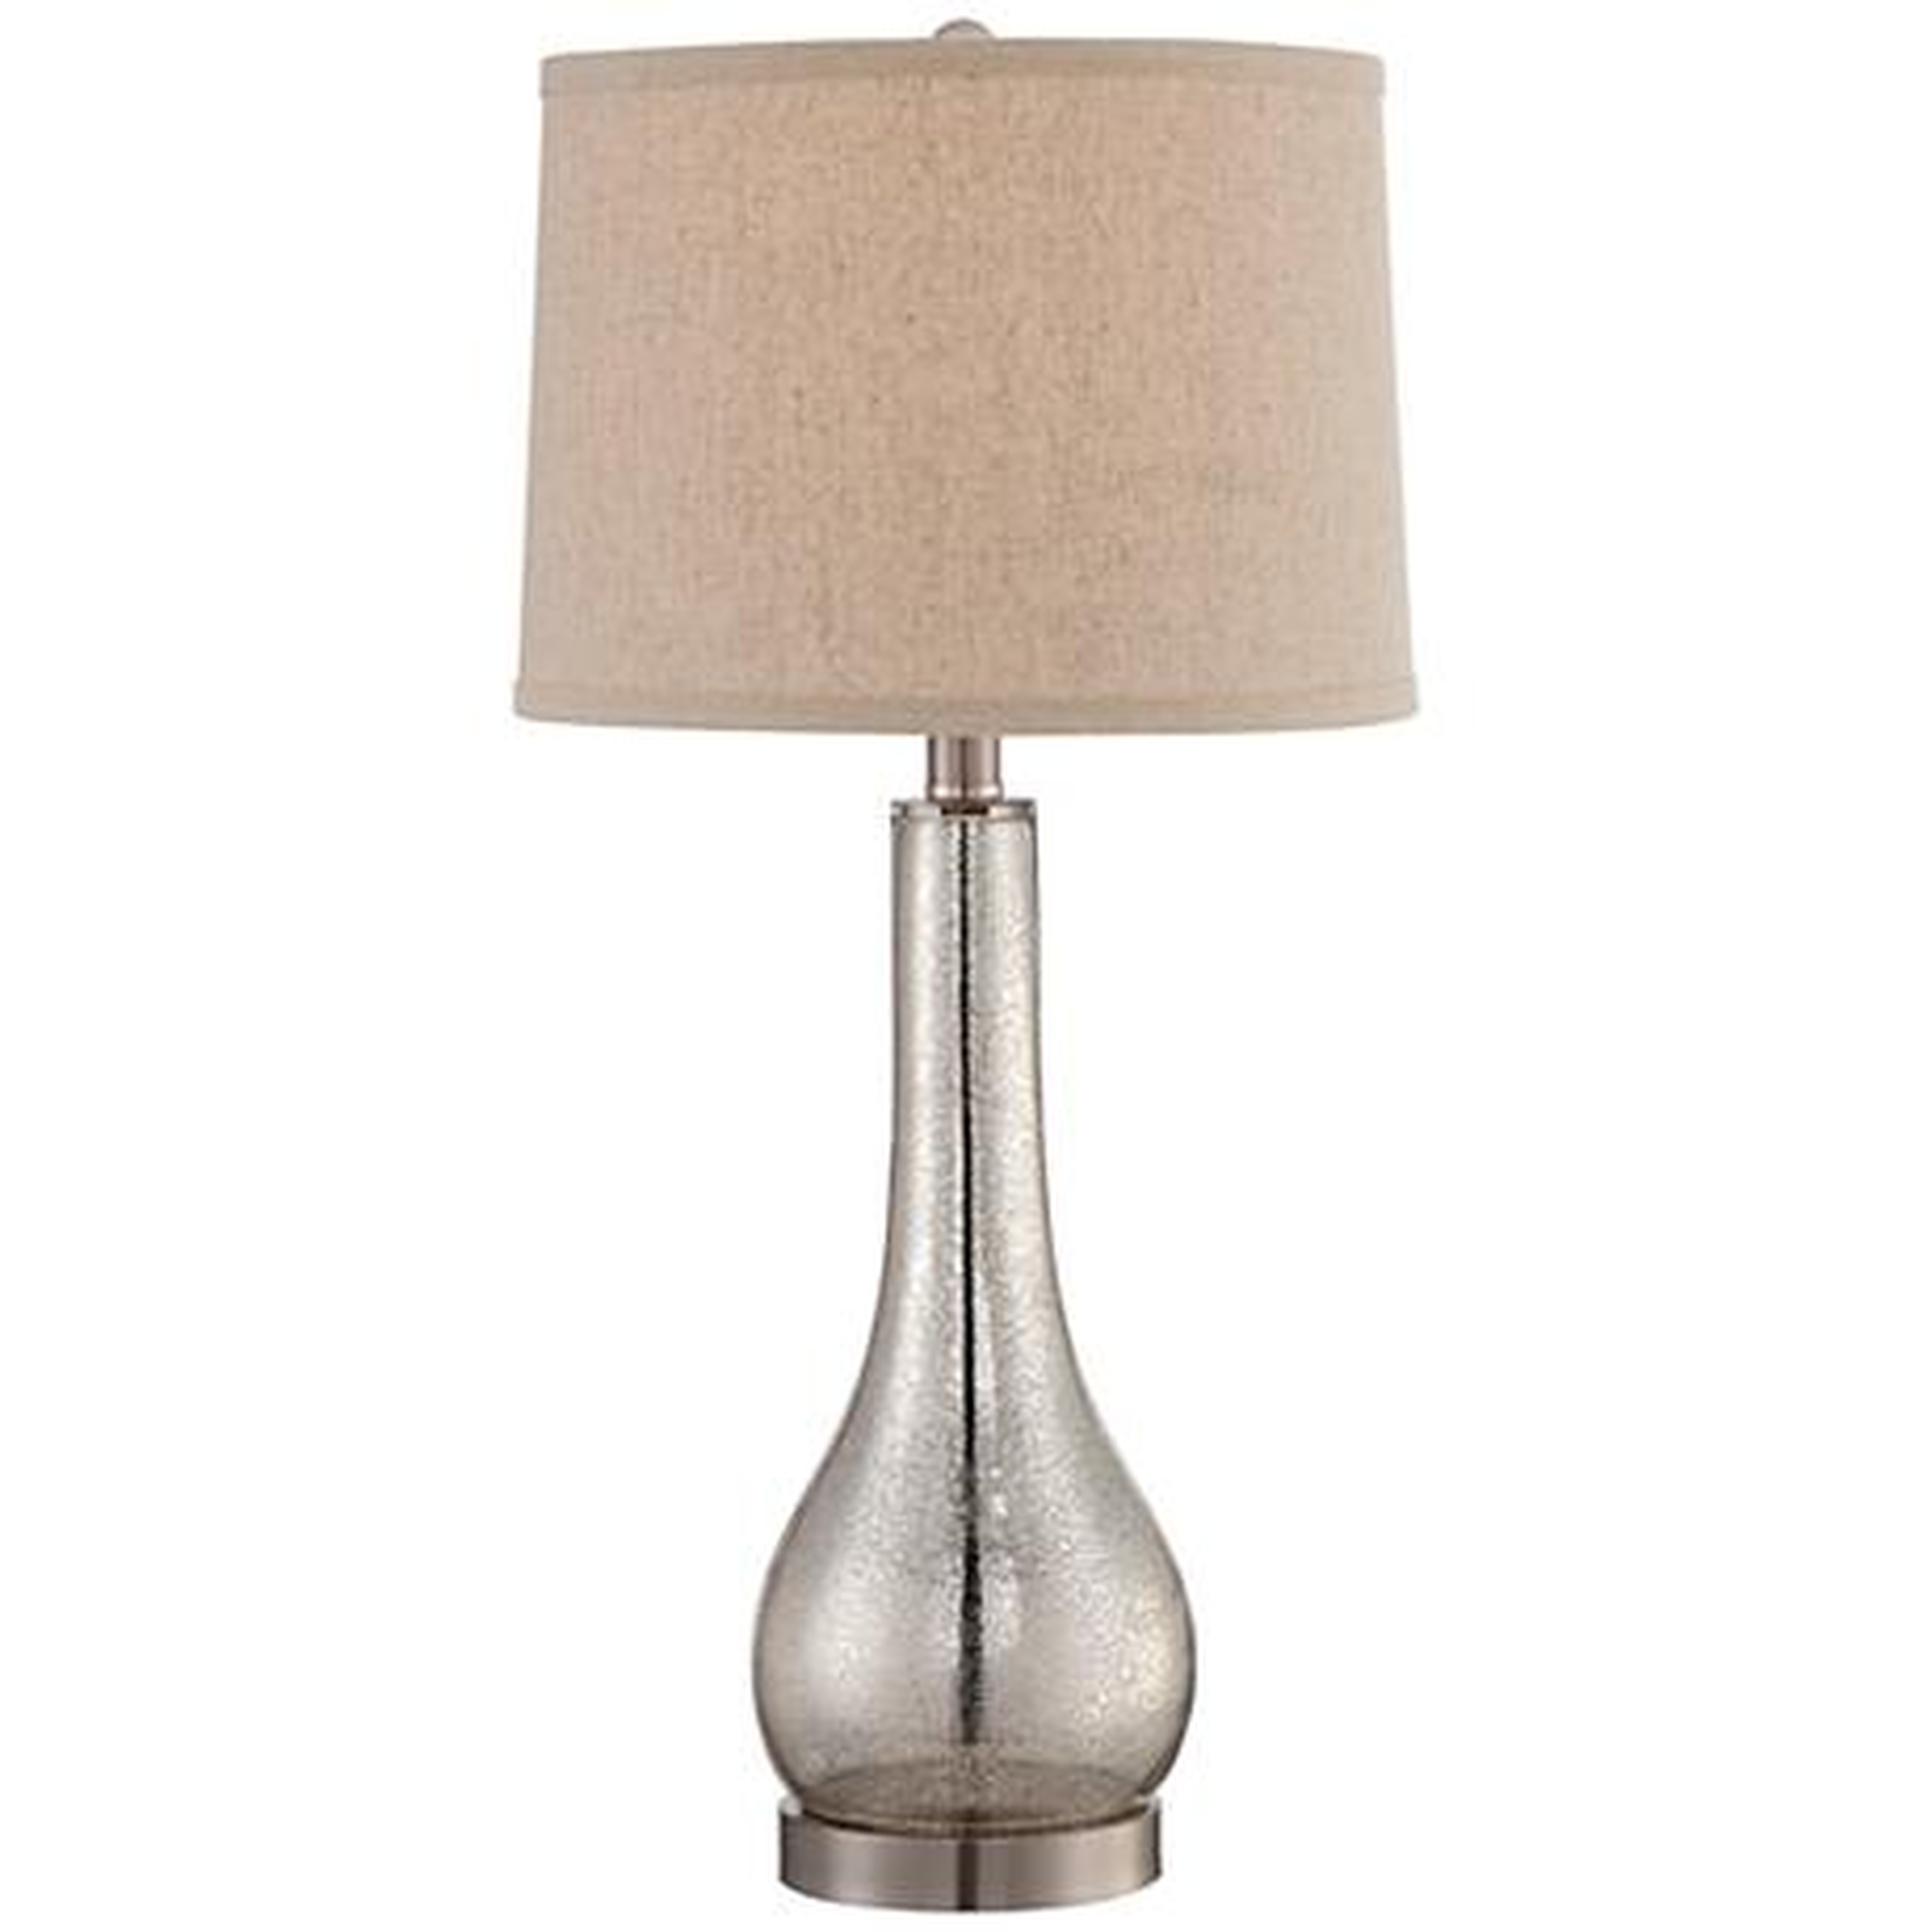 Janna Mercury Glass with Taupe Shade Gourd Table Lamp - Lamps Plus